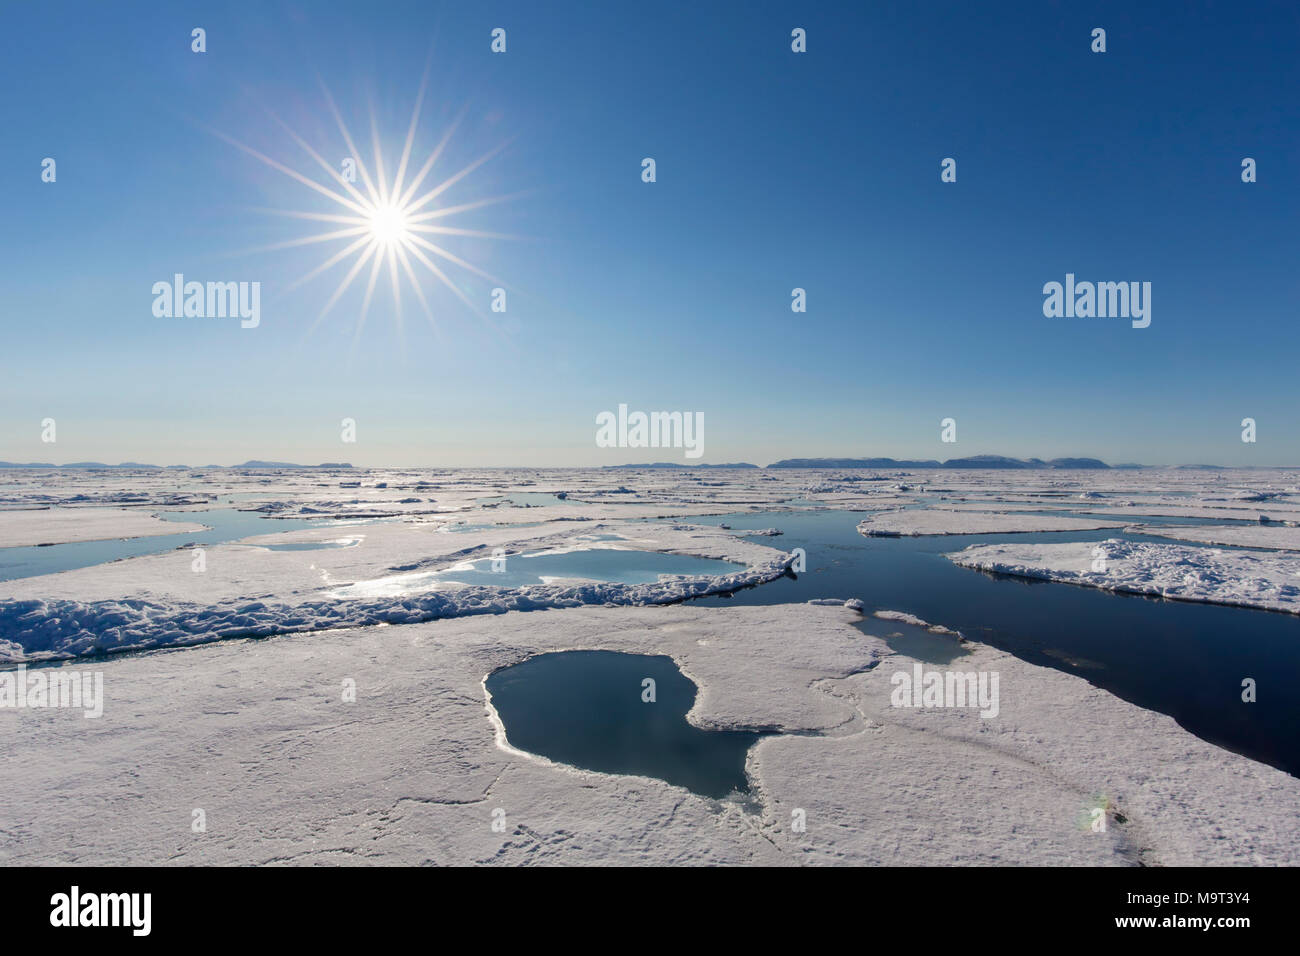 Midnight sun over the Arctic Ocean with drifting ice floes, north of the Arctic Circle at Nordaustlandet, Svalbard / Spitsbergen, Norway Stock Photo